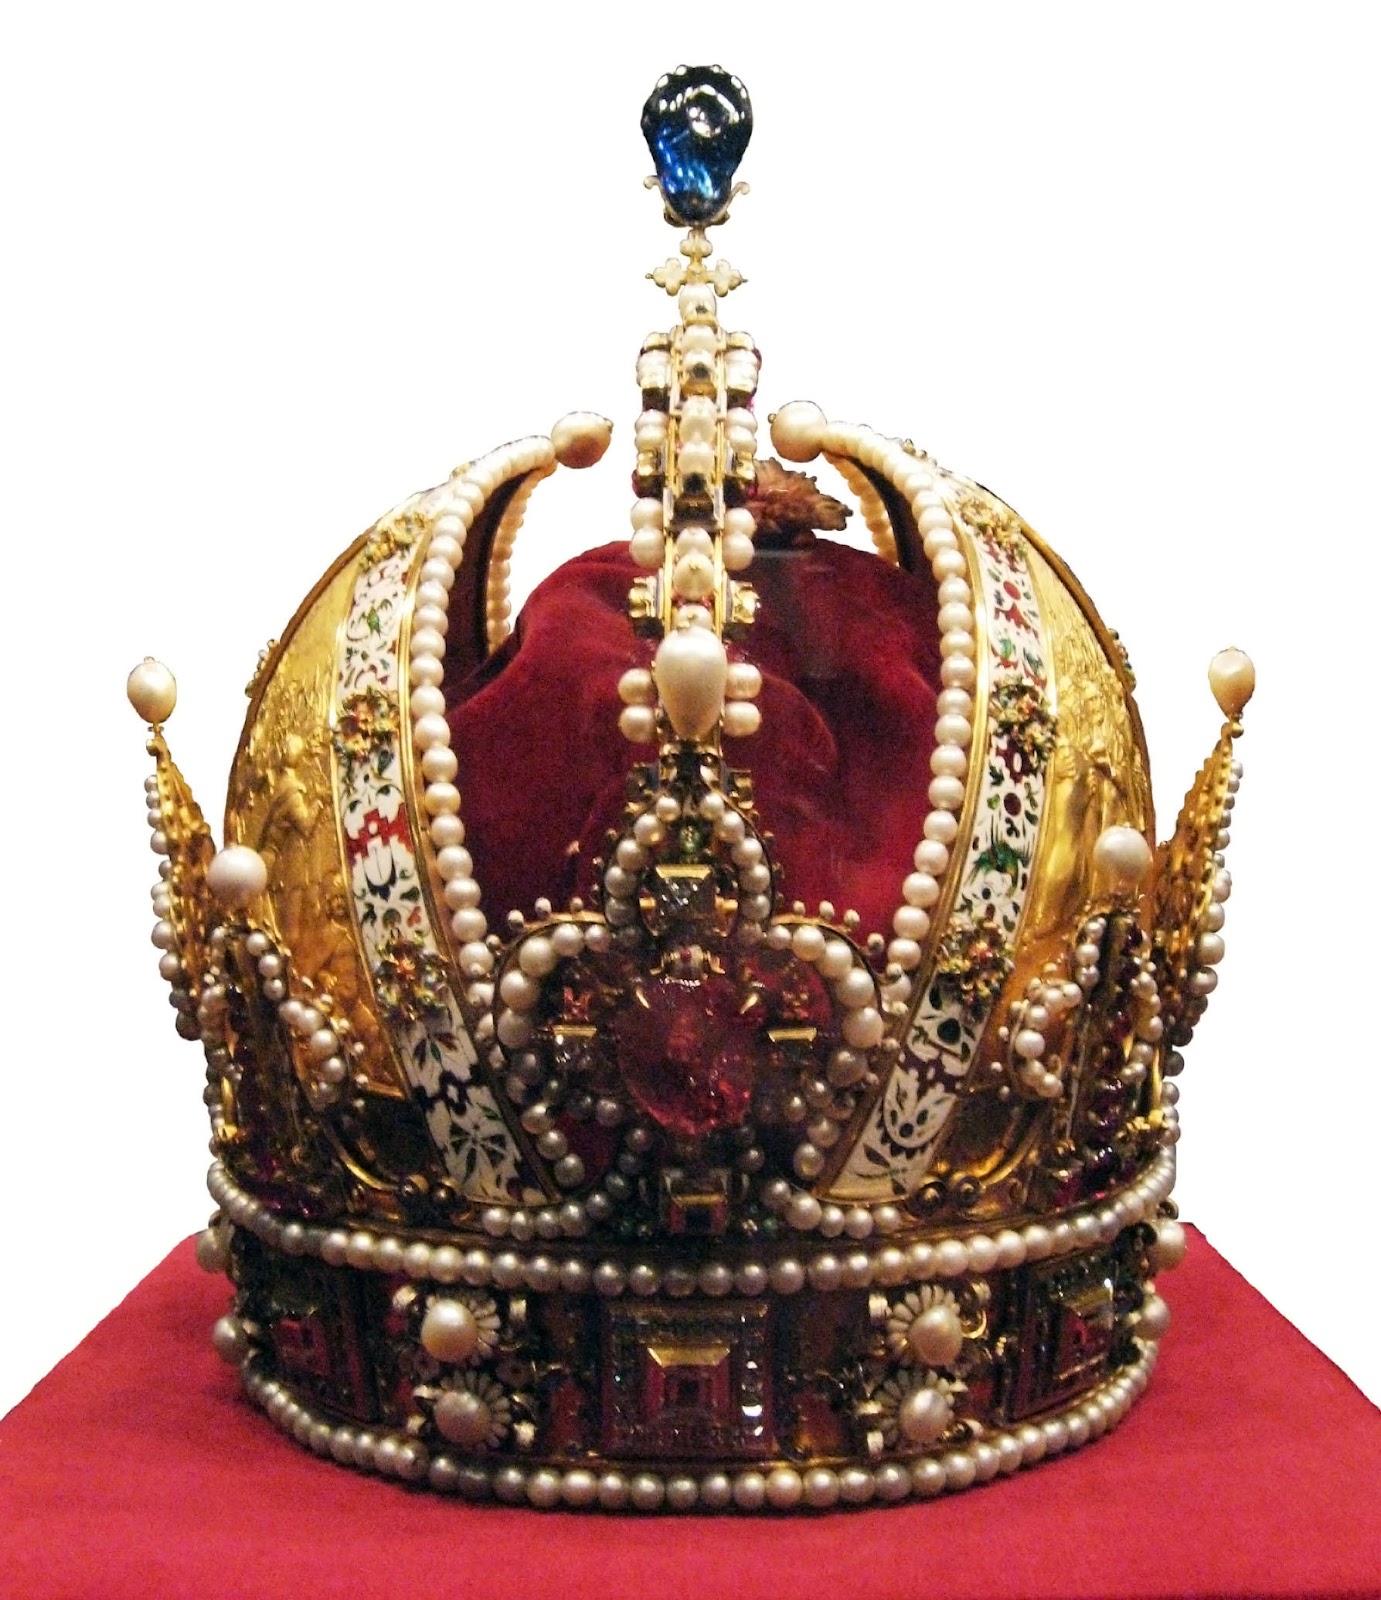 official and historic crowns of the world and their